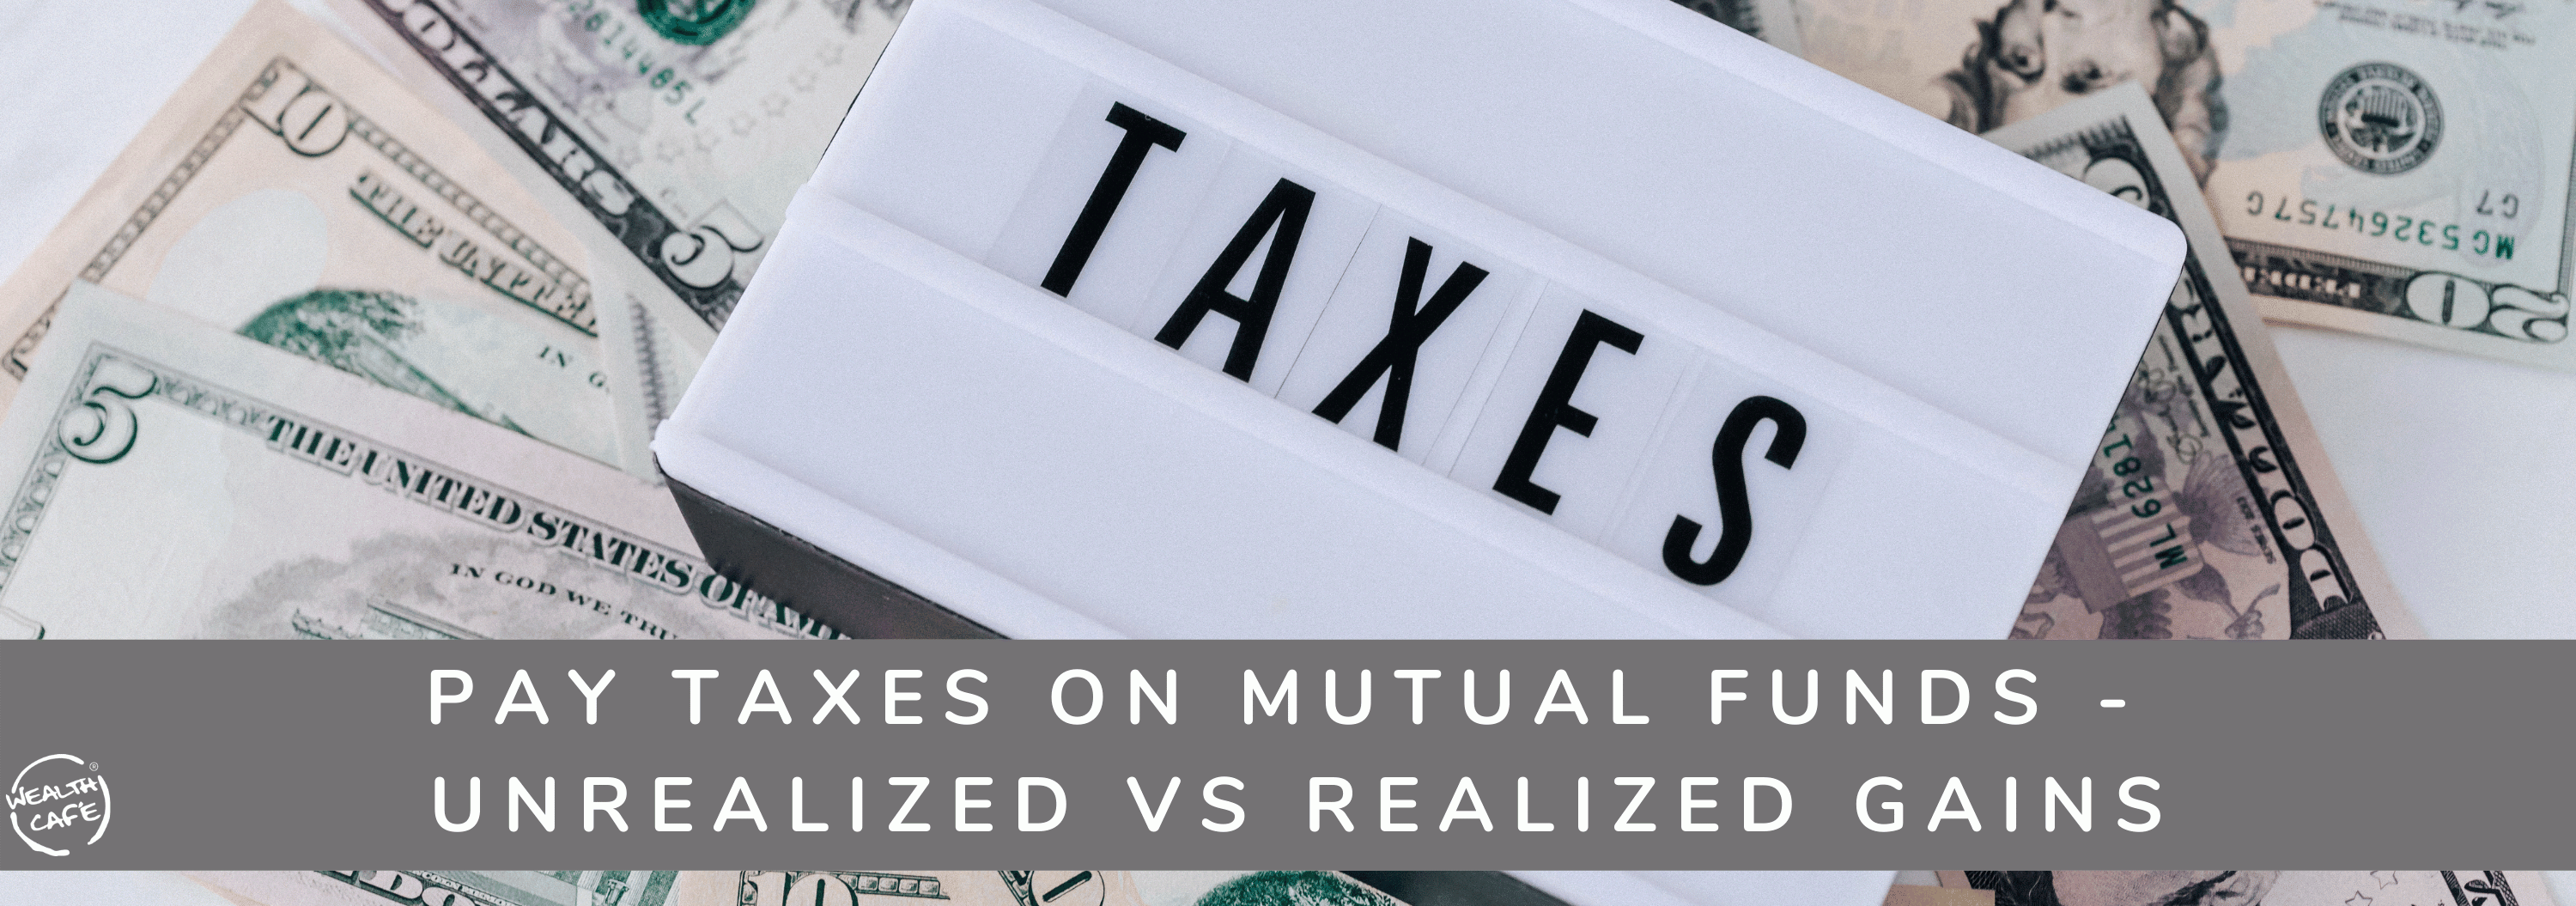 understanding-the-taxes-on-mutual-funds-withdrawal-surf-4-finance